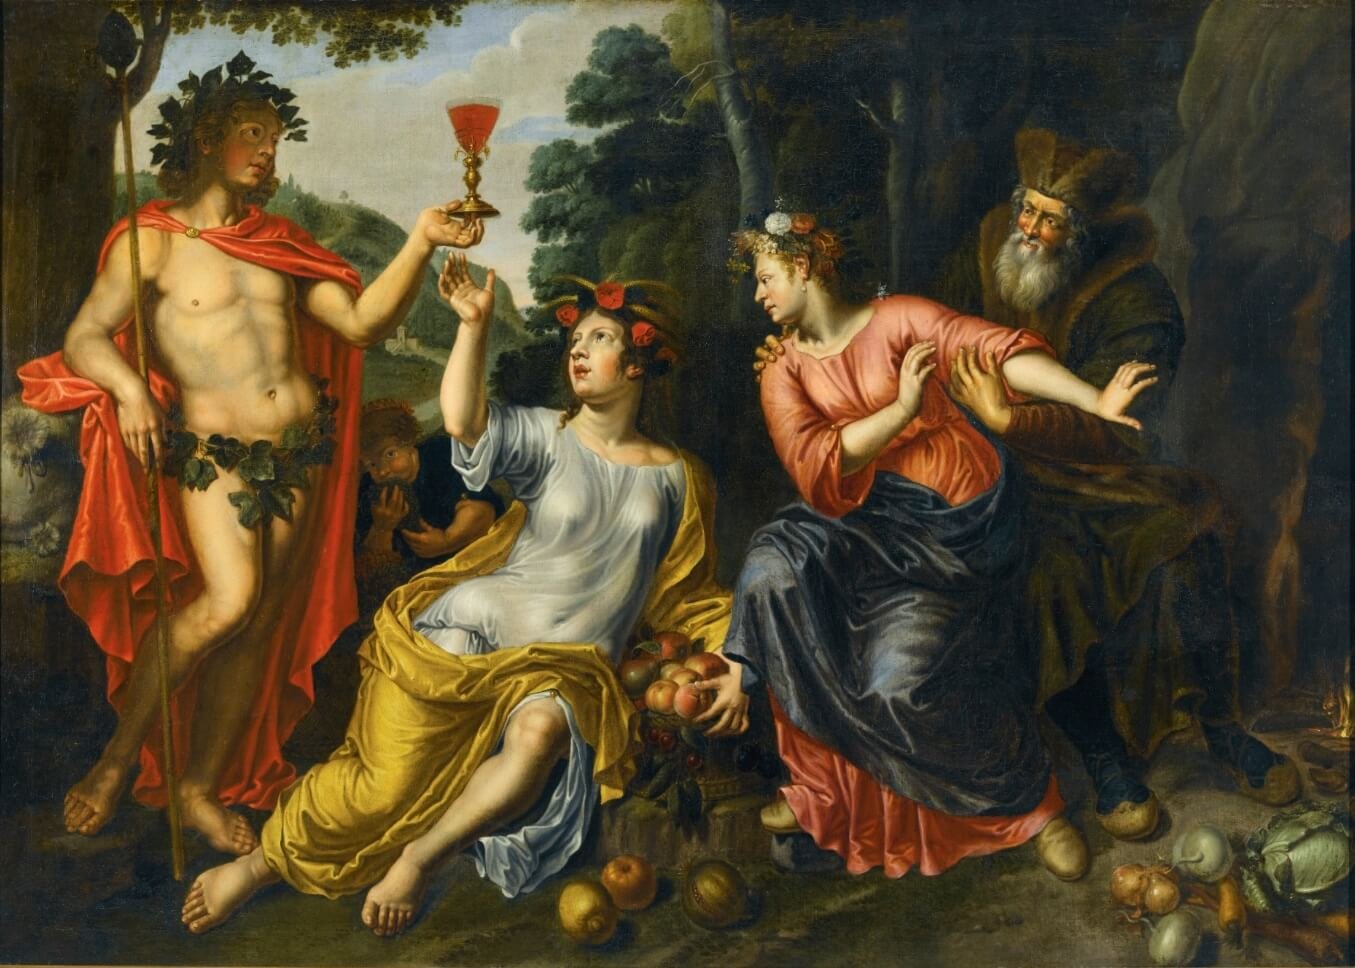 This painting depicts Dionysus, drinking wine with two maidens.